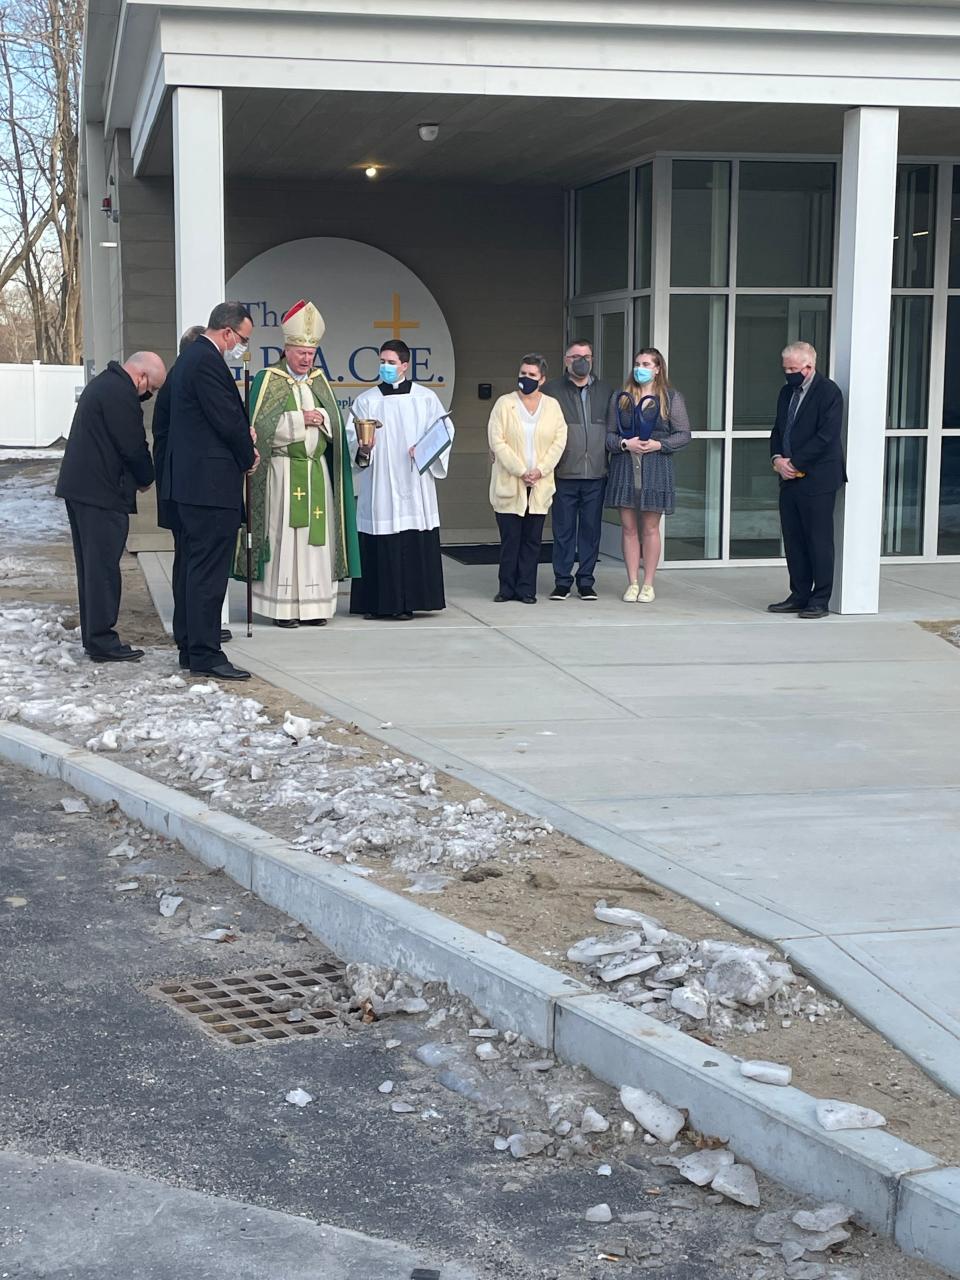 Diocese of Worcester Bishop Robert J. McManus blesses the G.R.A.C.E. Center during a ribbon-cutting ceremony Sunday on the campus of Our Lady of the Valley Regional School in Uxbridge, as the Rett family, right, looks on.